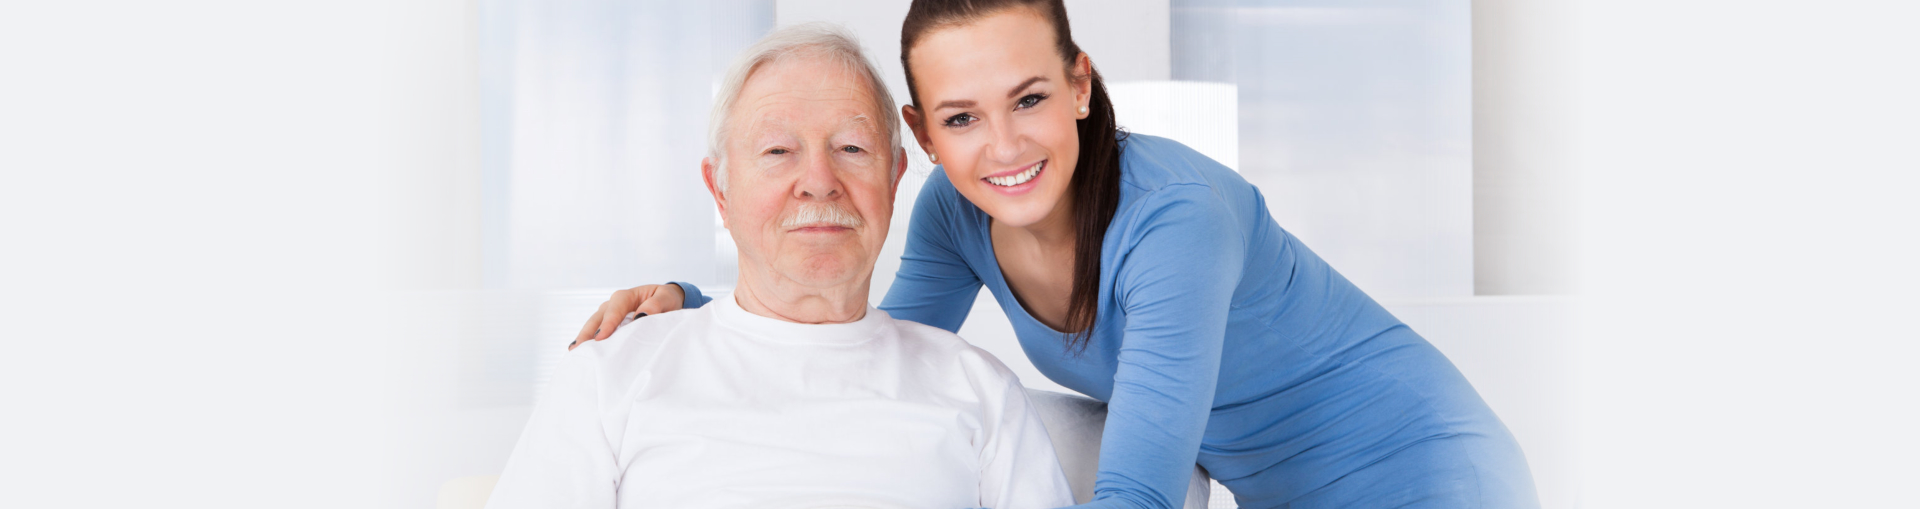 woman and old man smiling